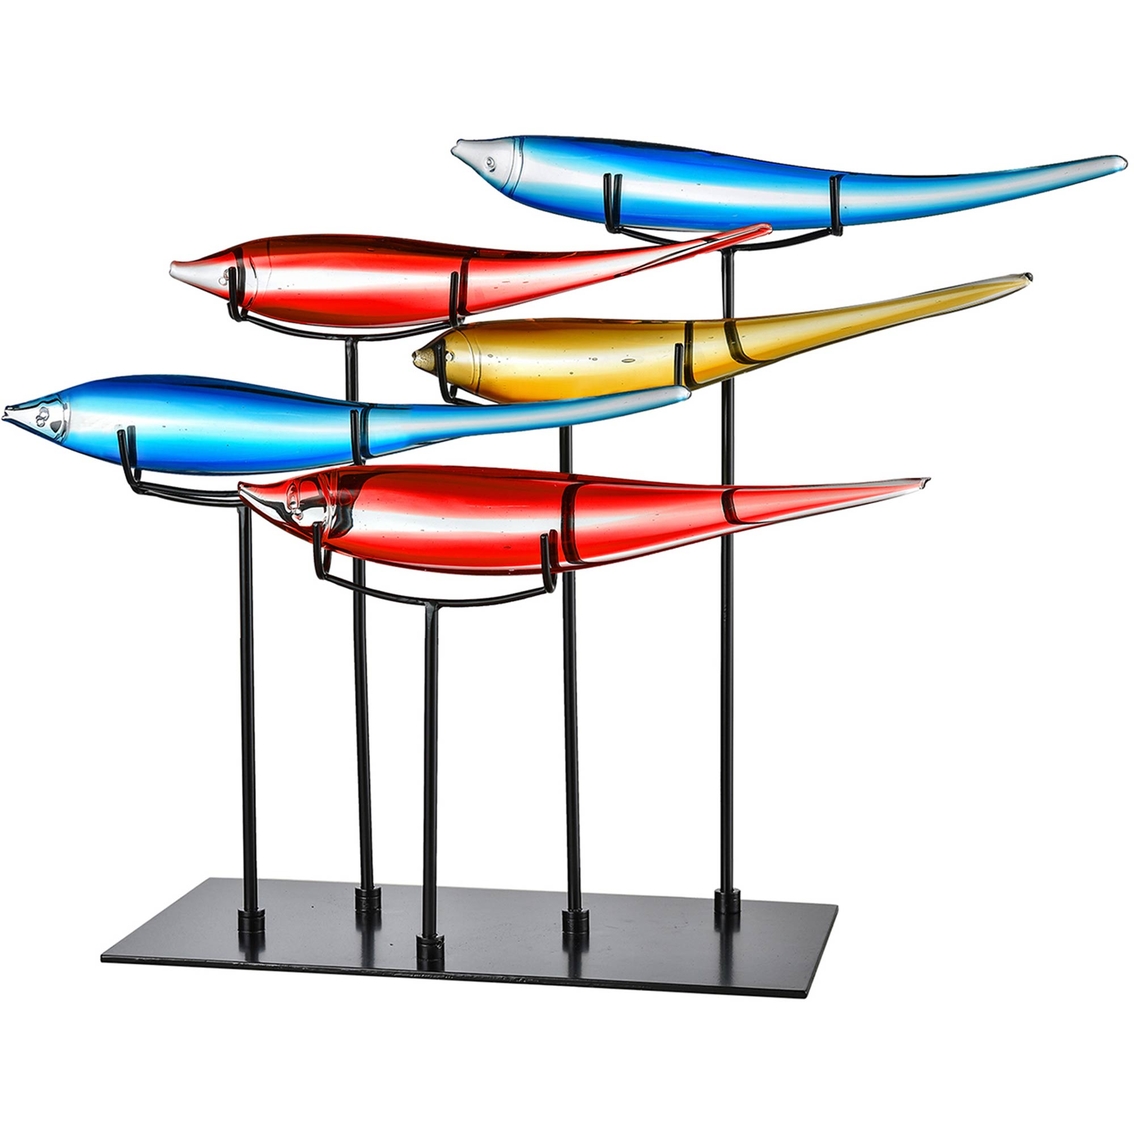 Dale Tiffany 5 Pc. Multi Color Fish With Stand - Image 1 of 2